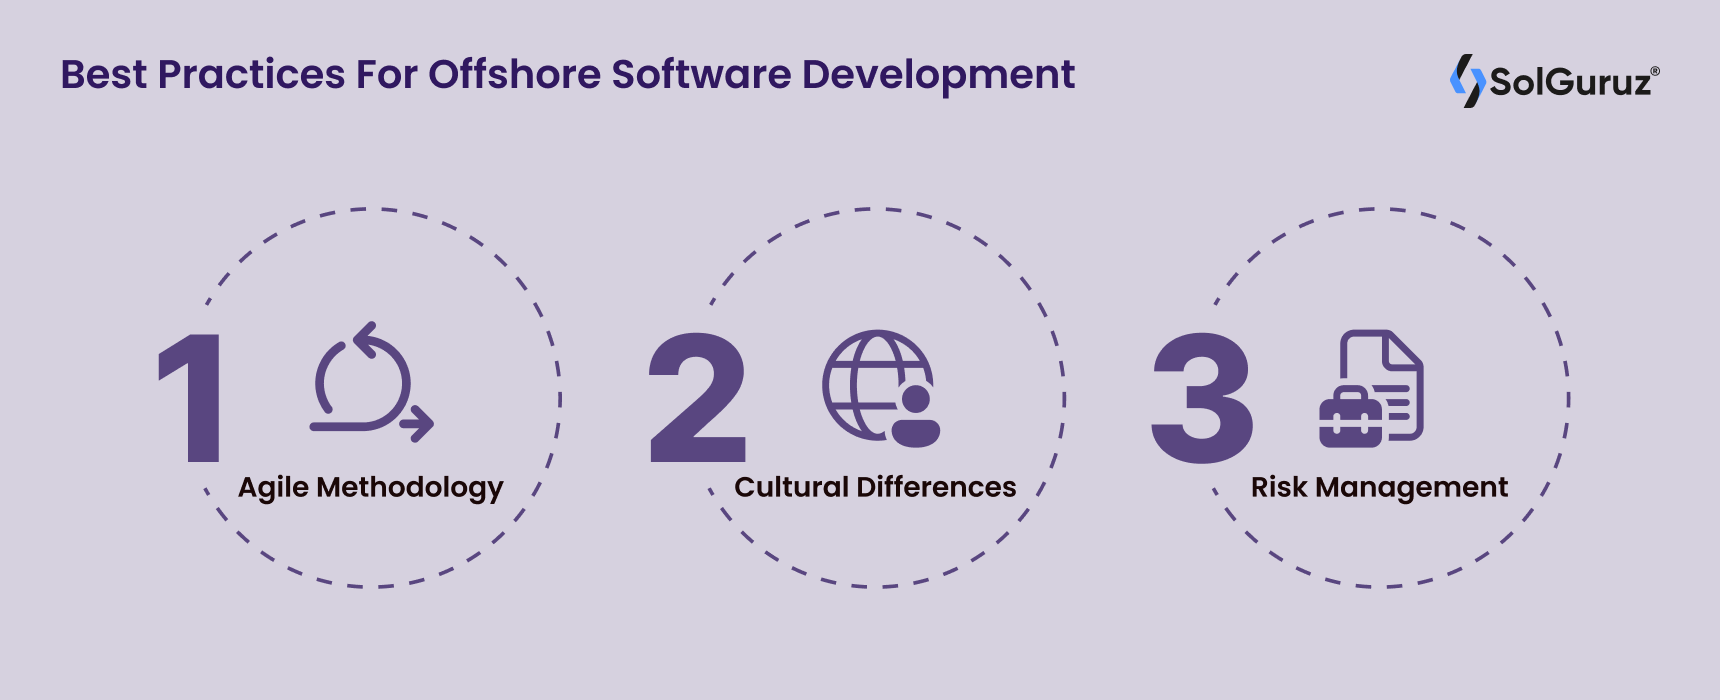 Best Practices For the Offshore Software Development